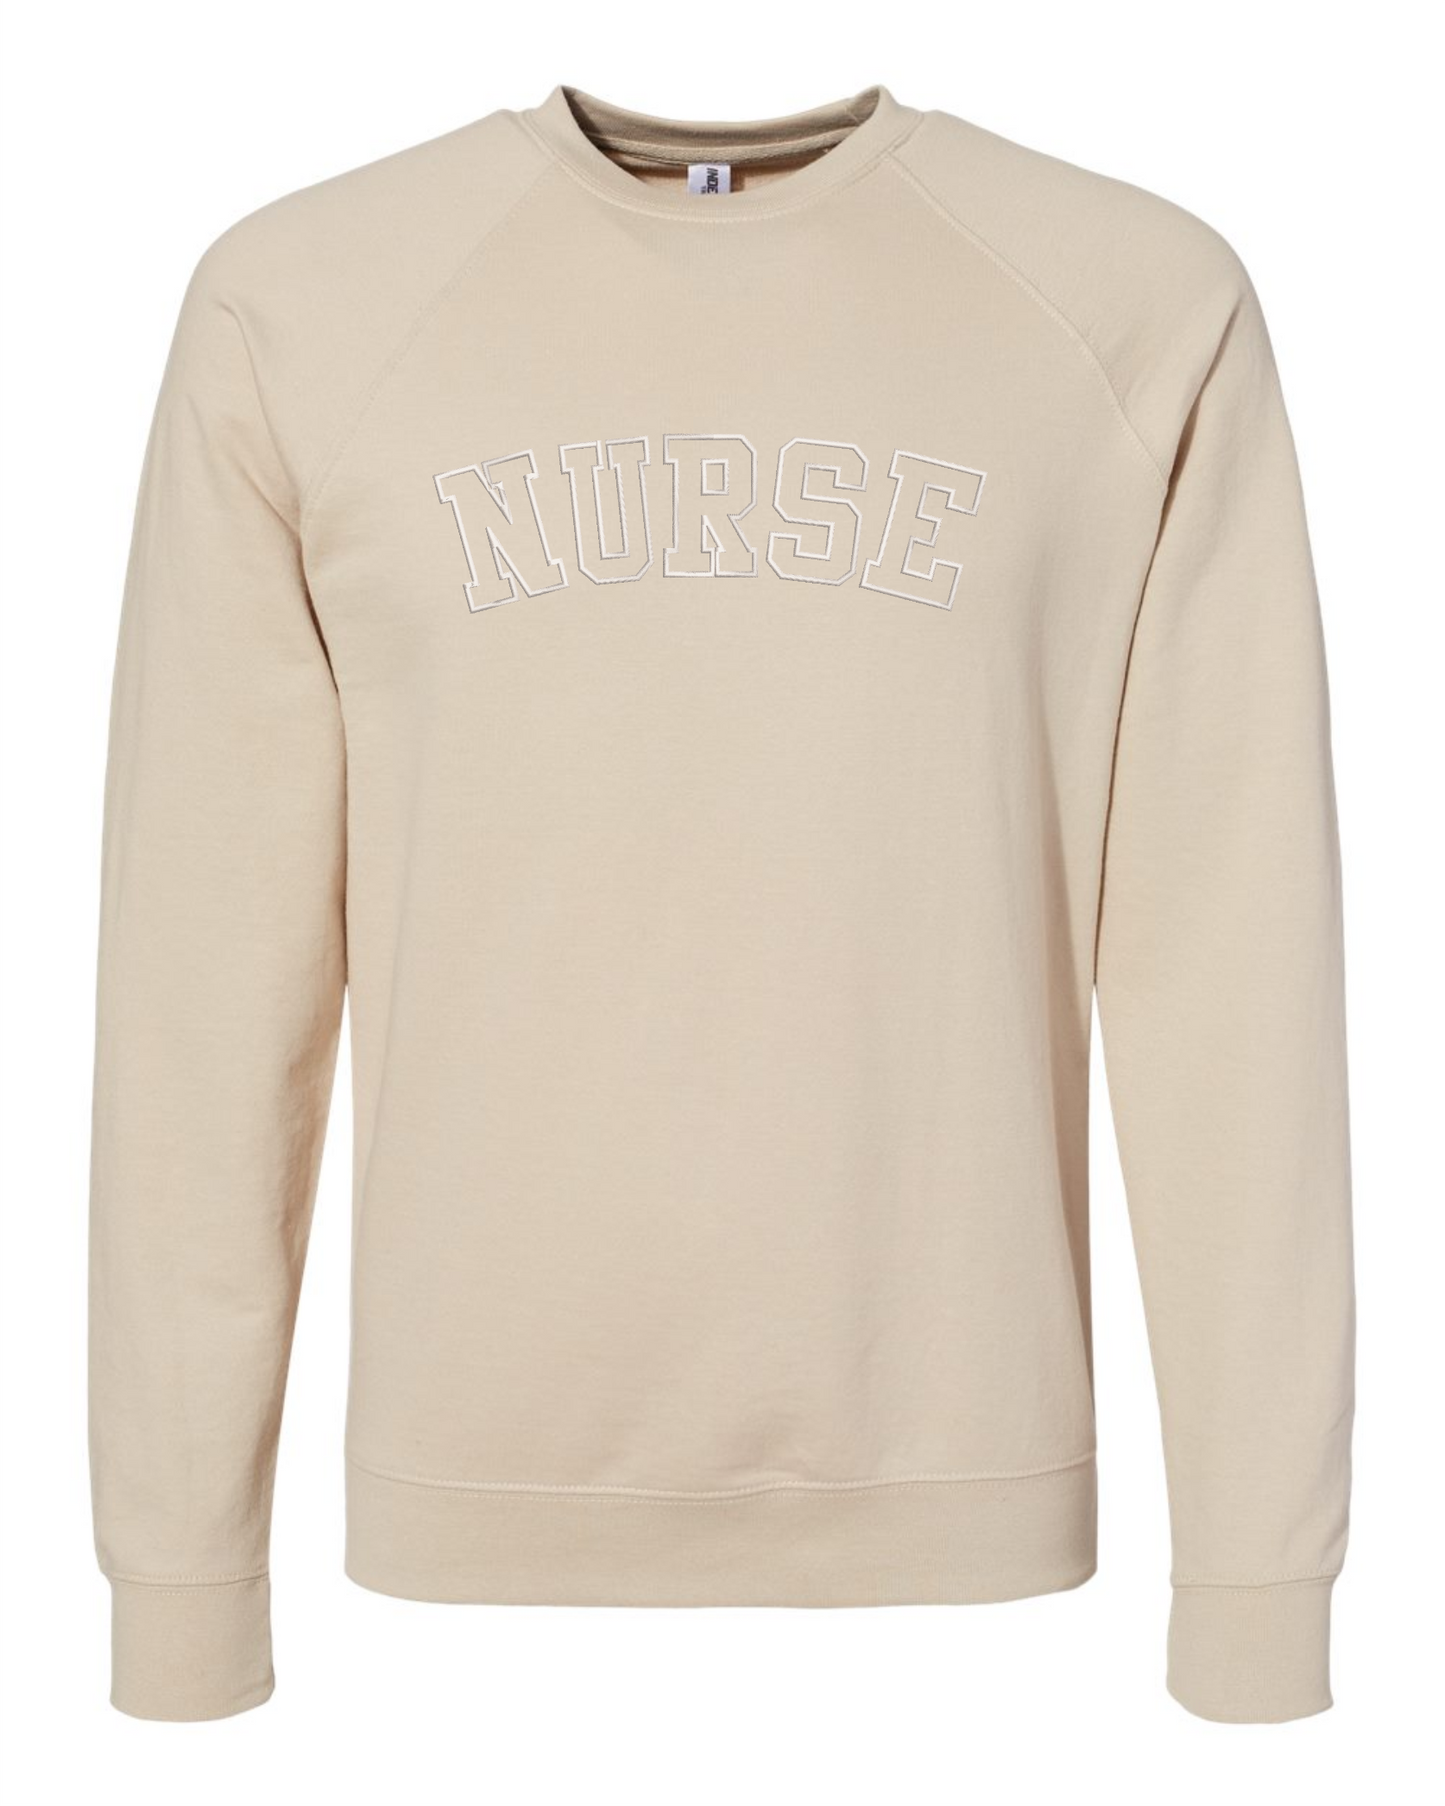 Sand - Stylish and Comfortable Embroidered Nurse Crewneck: Perfect for Healthcare Professionals Active